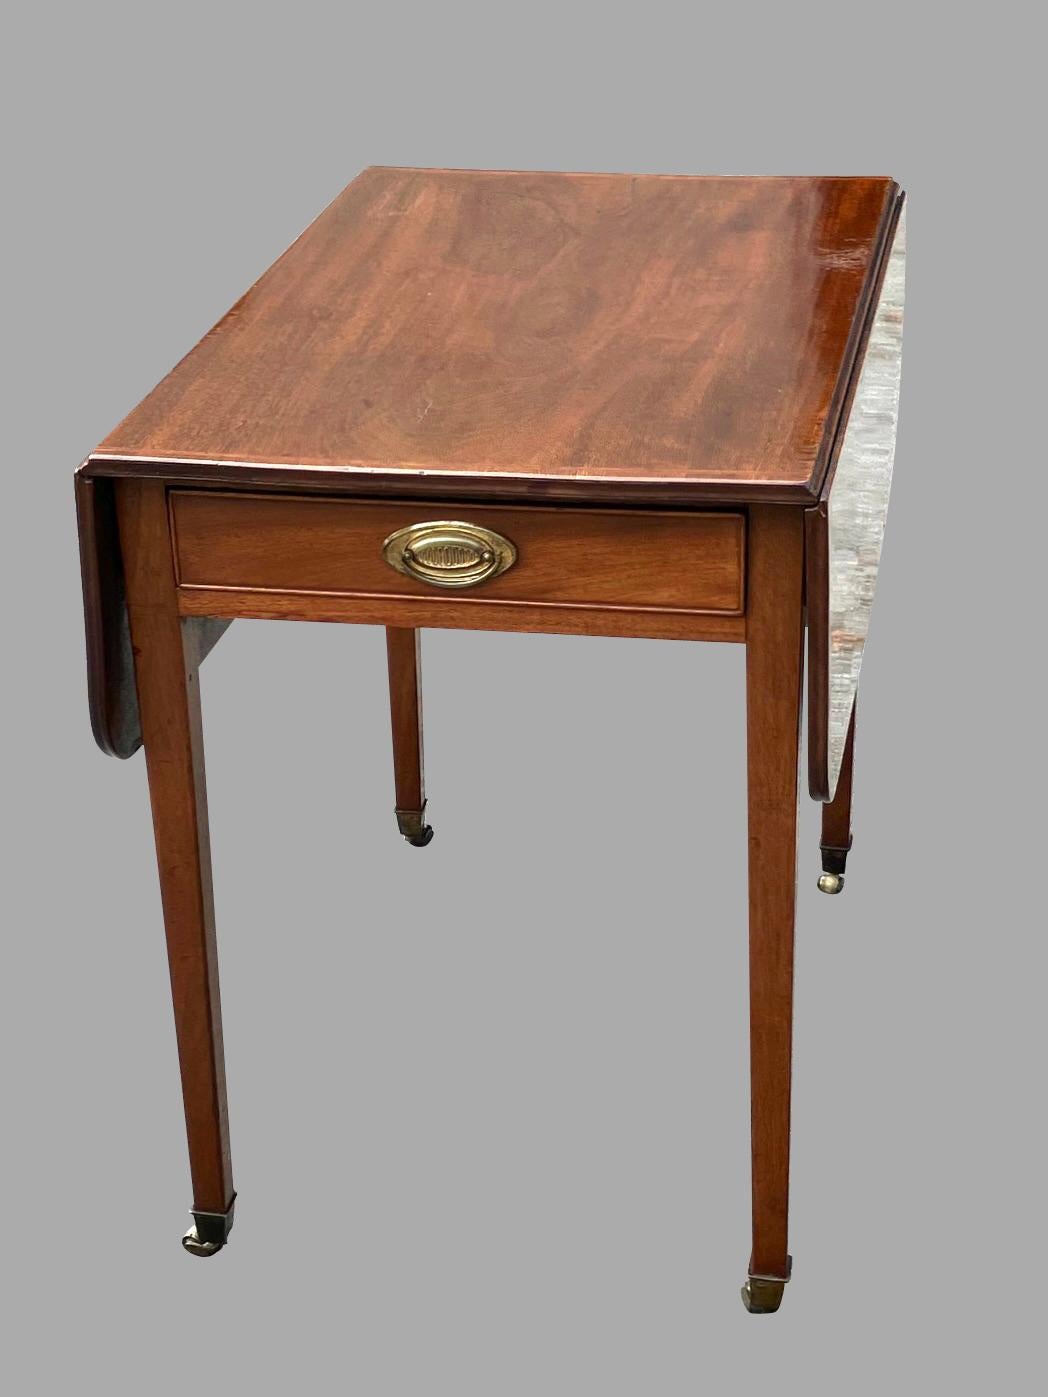 A rectangular English mahogany pembroke table of typical form, the top with a finely inlaid border above a central drawer, with 2 folding end sections, all supported on square tapered legs ending in casters. French polished finish. Circa 1790.